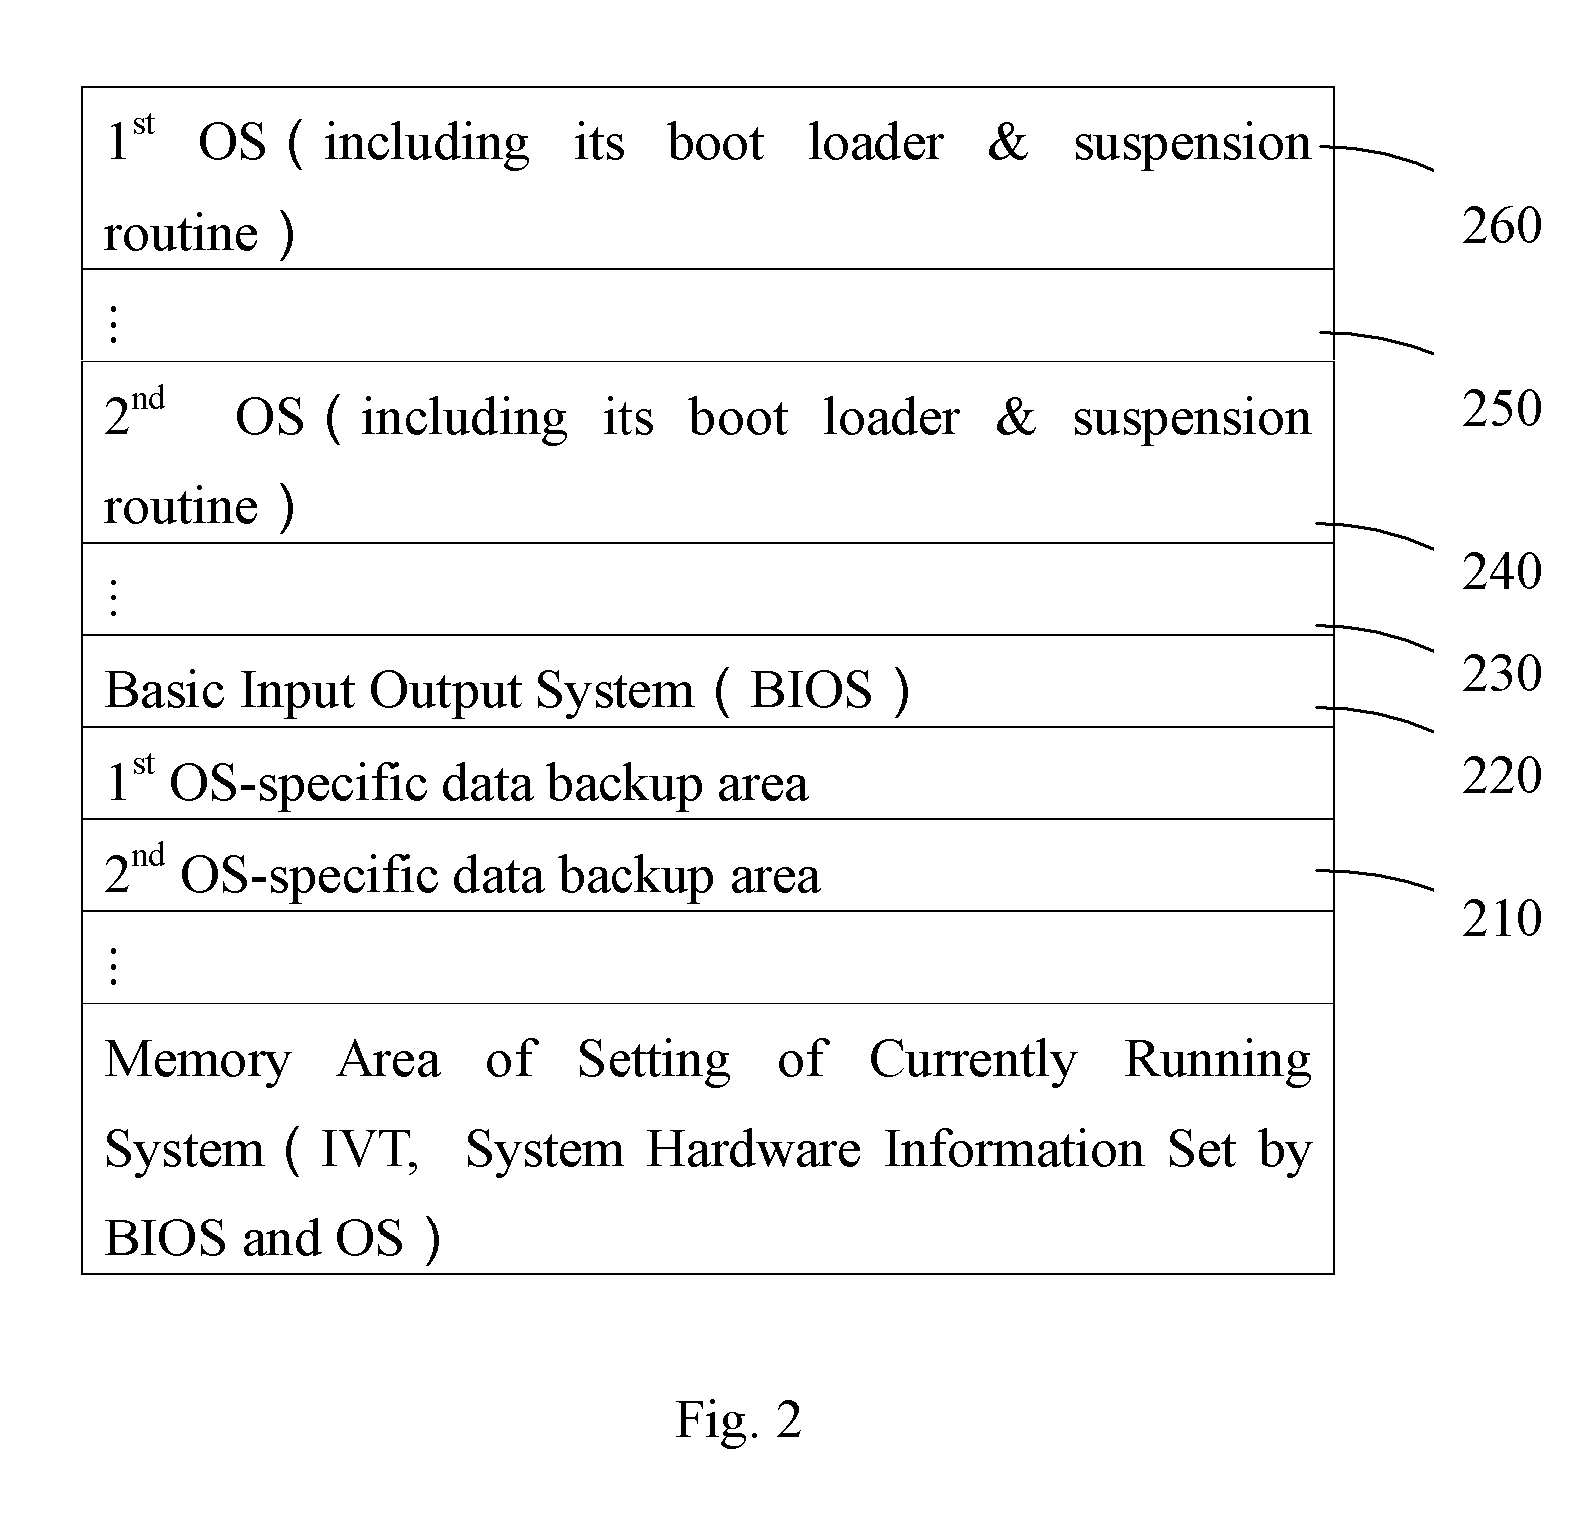 Computer systems with several operating systems coexisting thereon and swapping between these operating systems